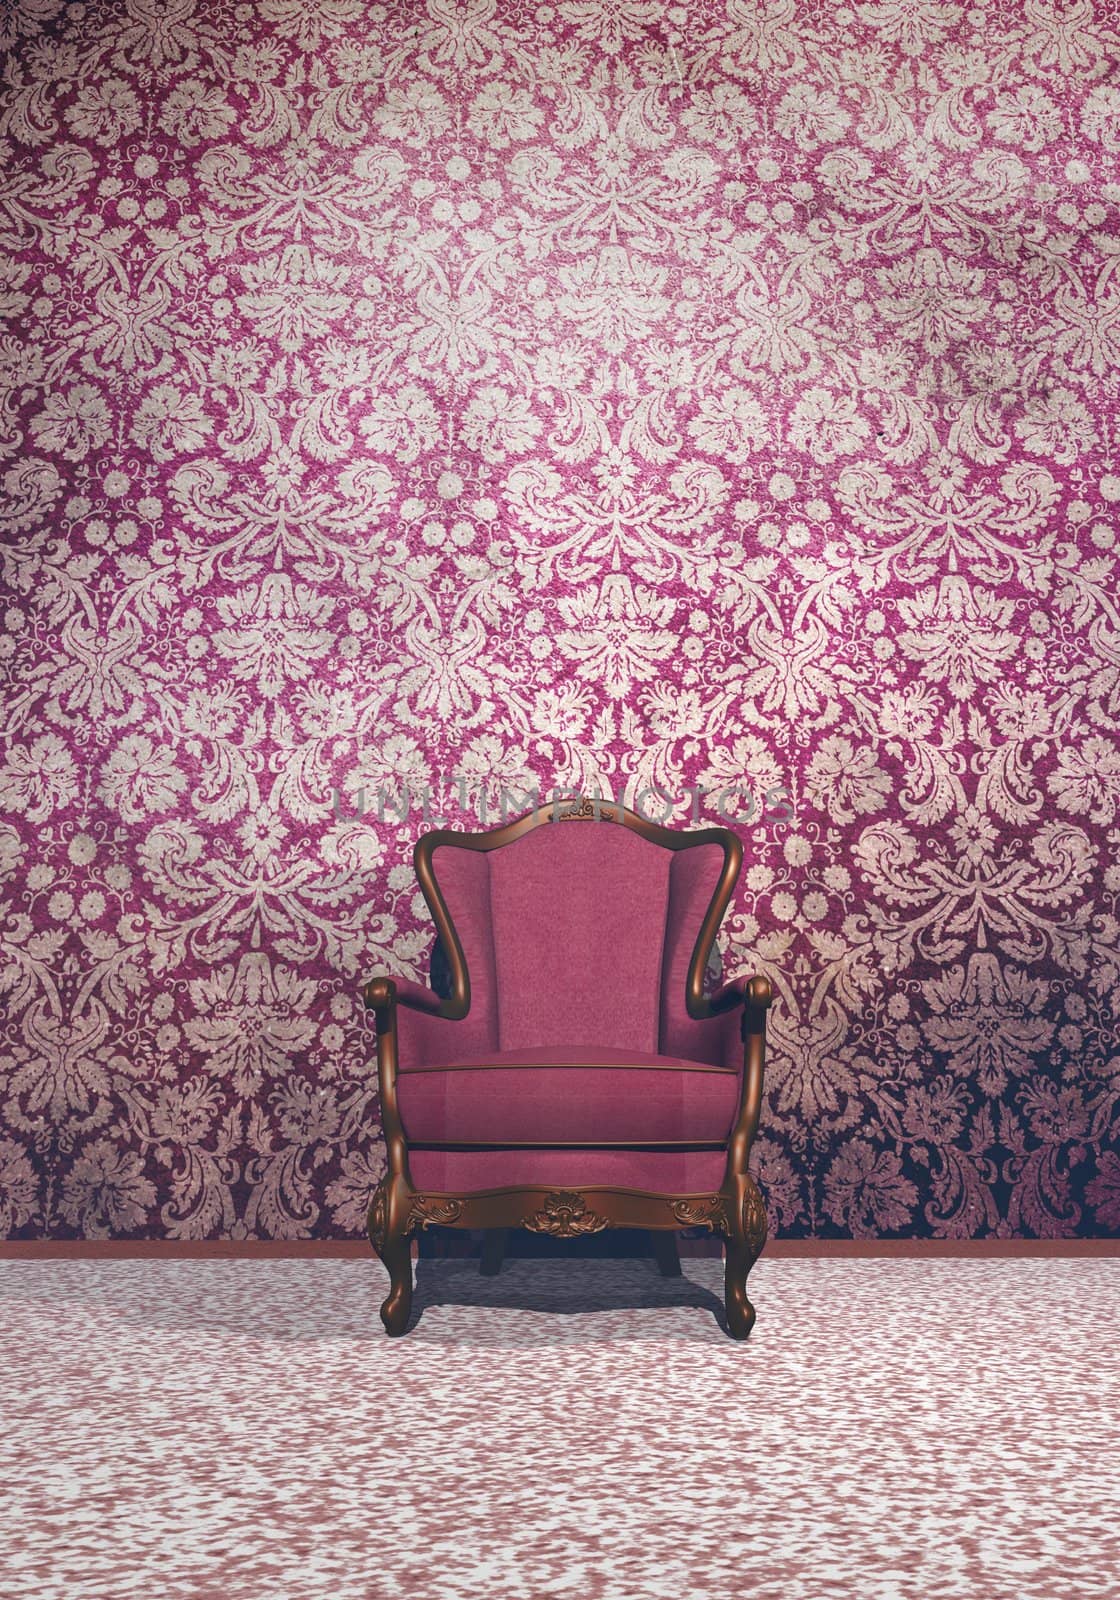 Vintage armchair in retro room with very old wallpaper